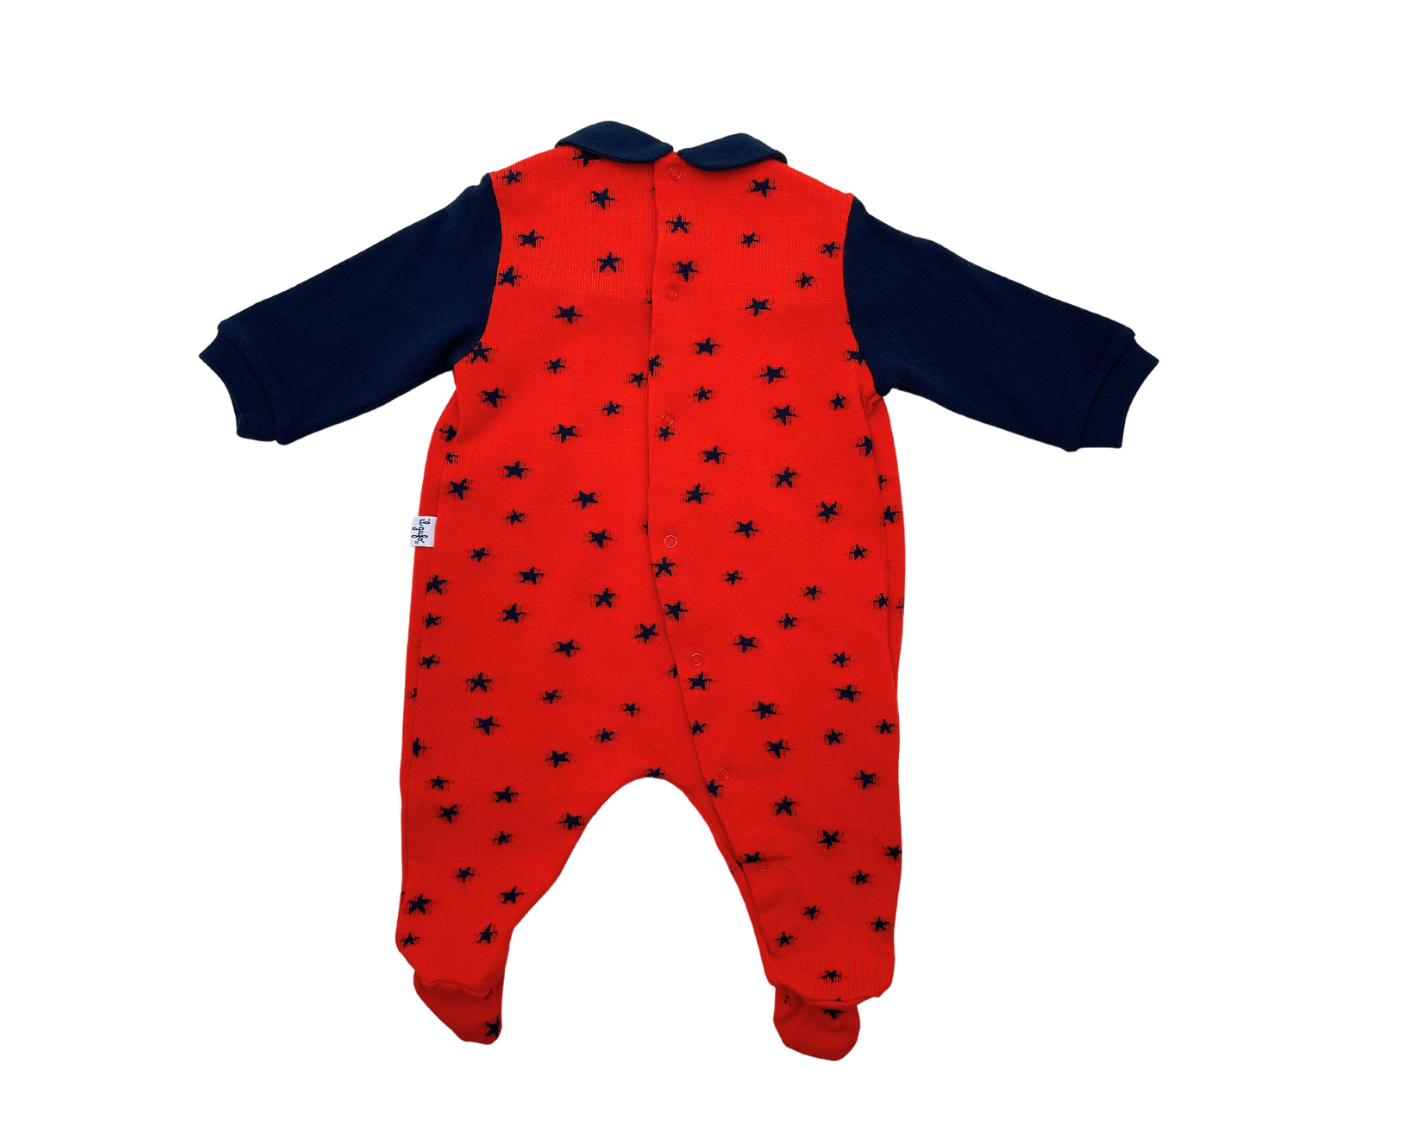 IL GUFO - Red jumpsuit with stars - 3 months